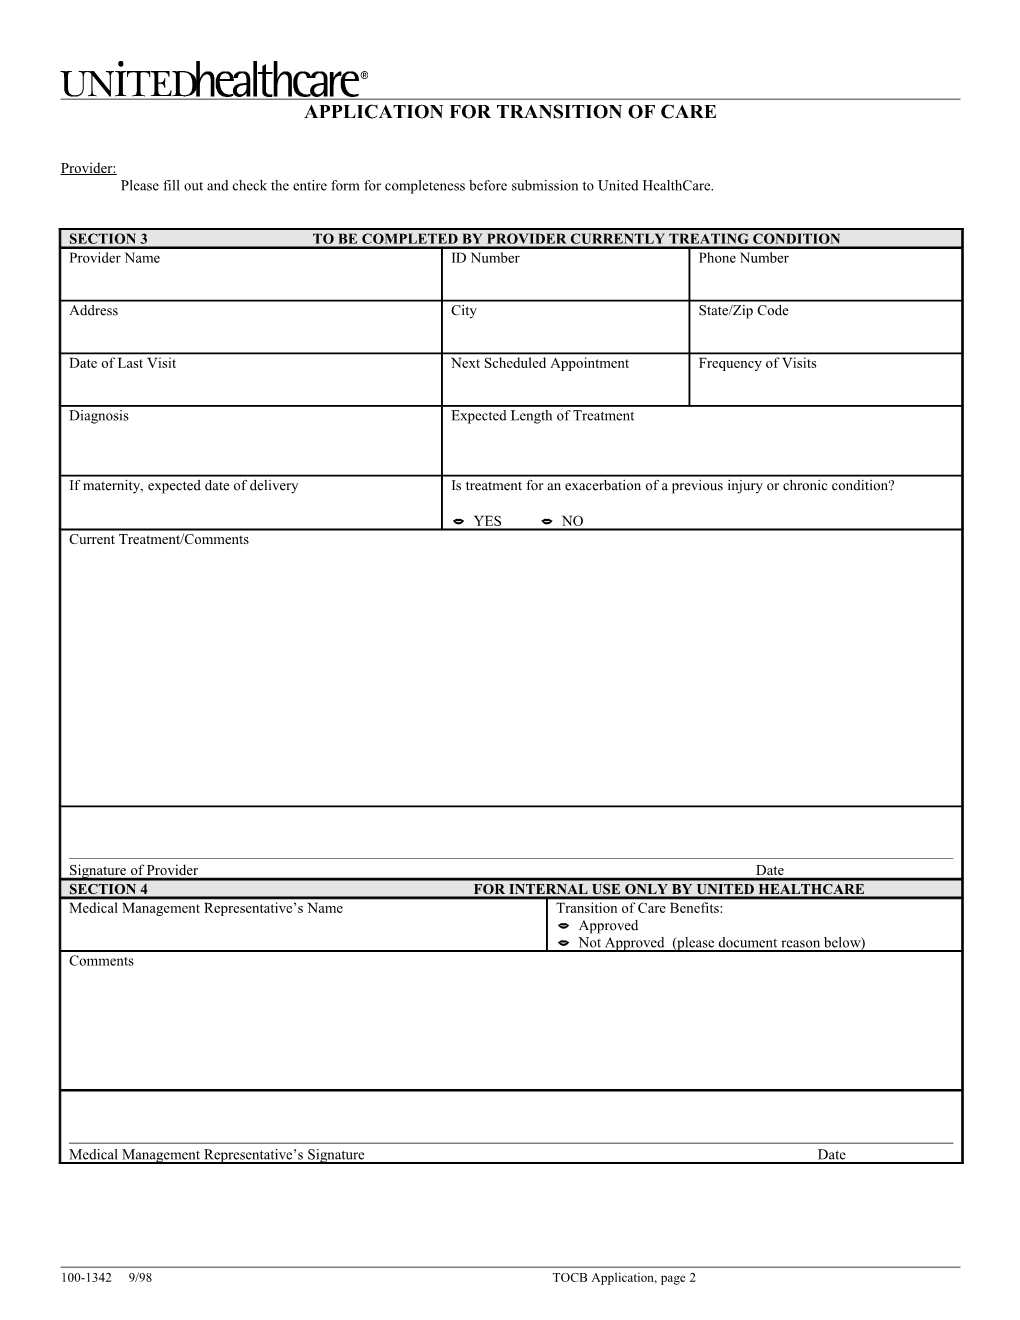 APPLICATION for Transition of Care